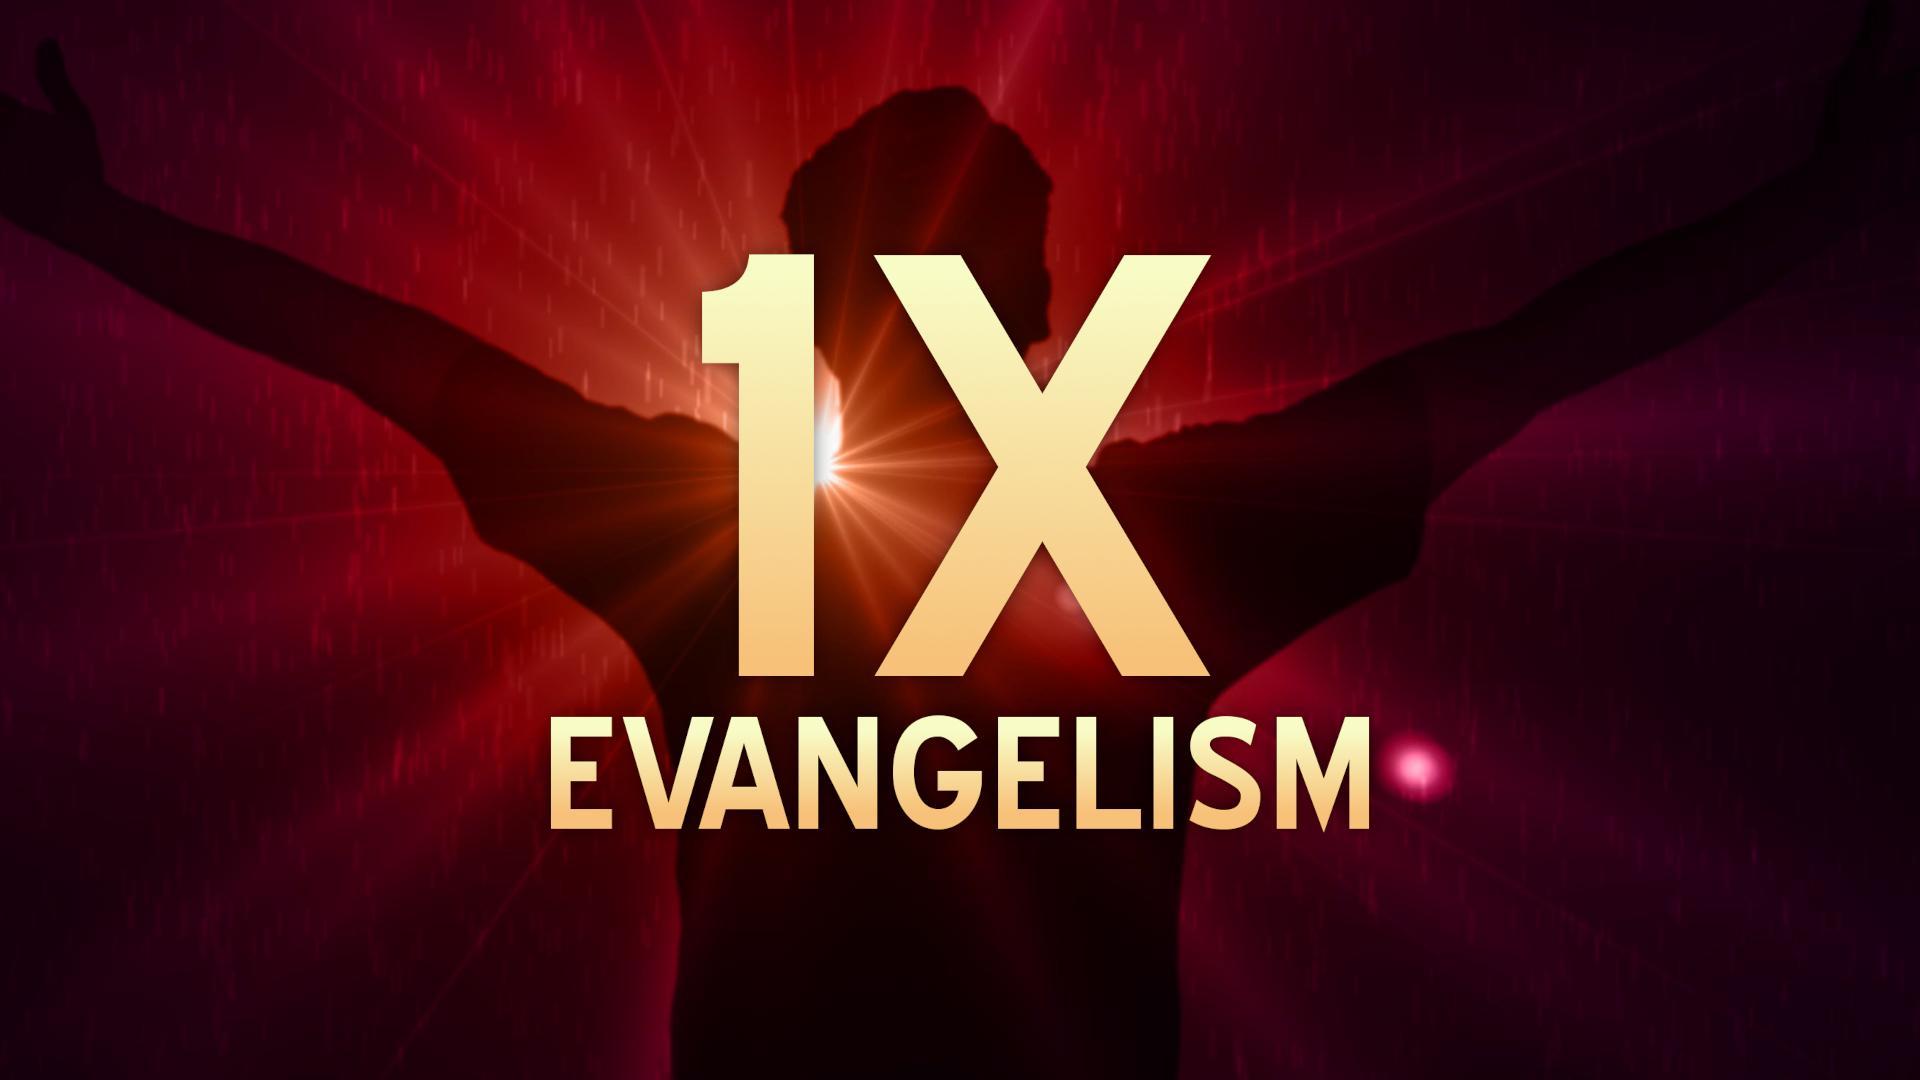 1X Evangelism - a personal evangelism and kingdom growth strategy for the local church